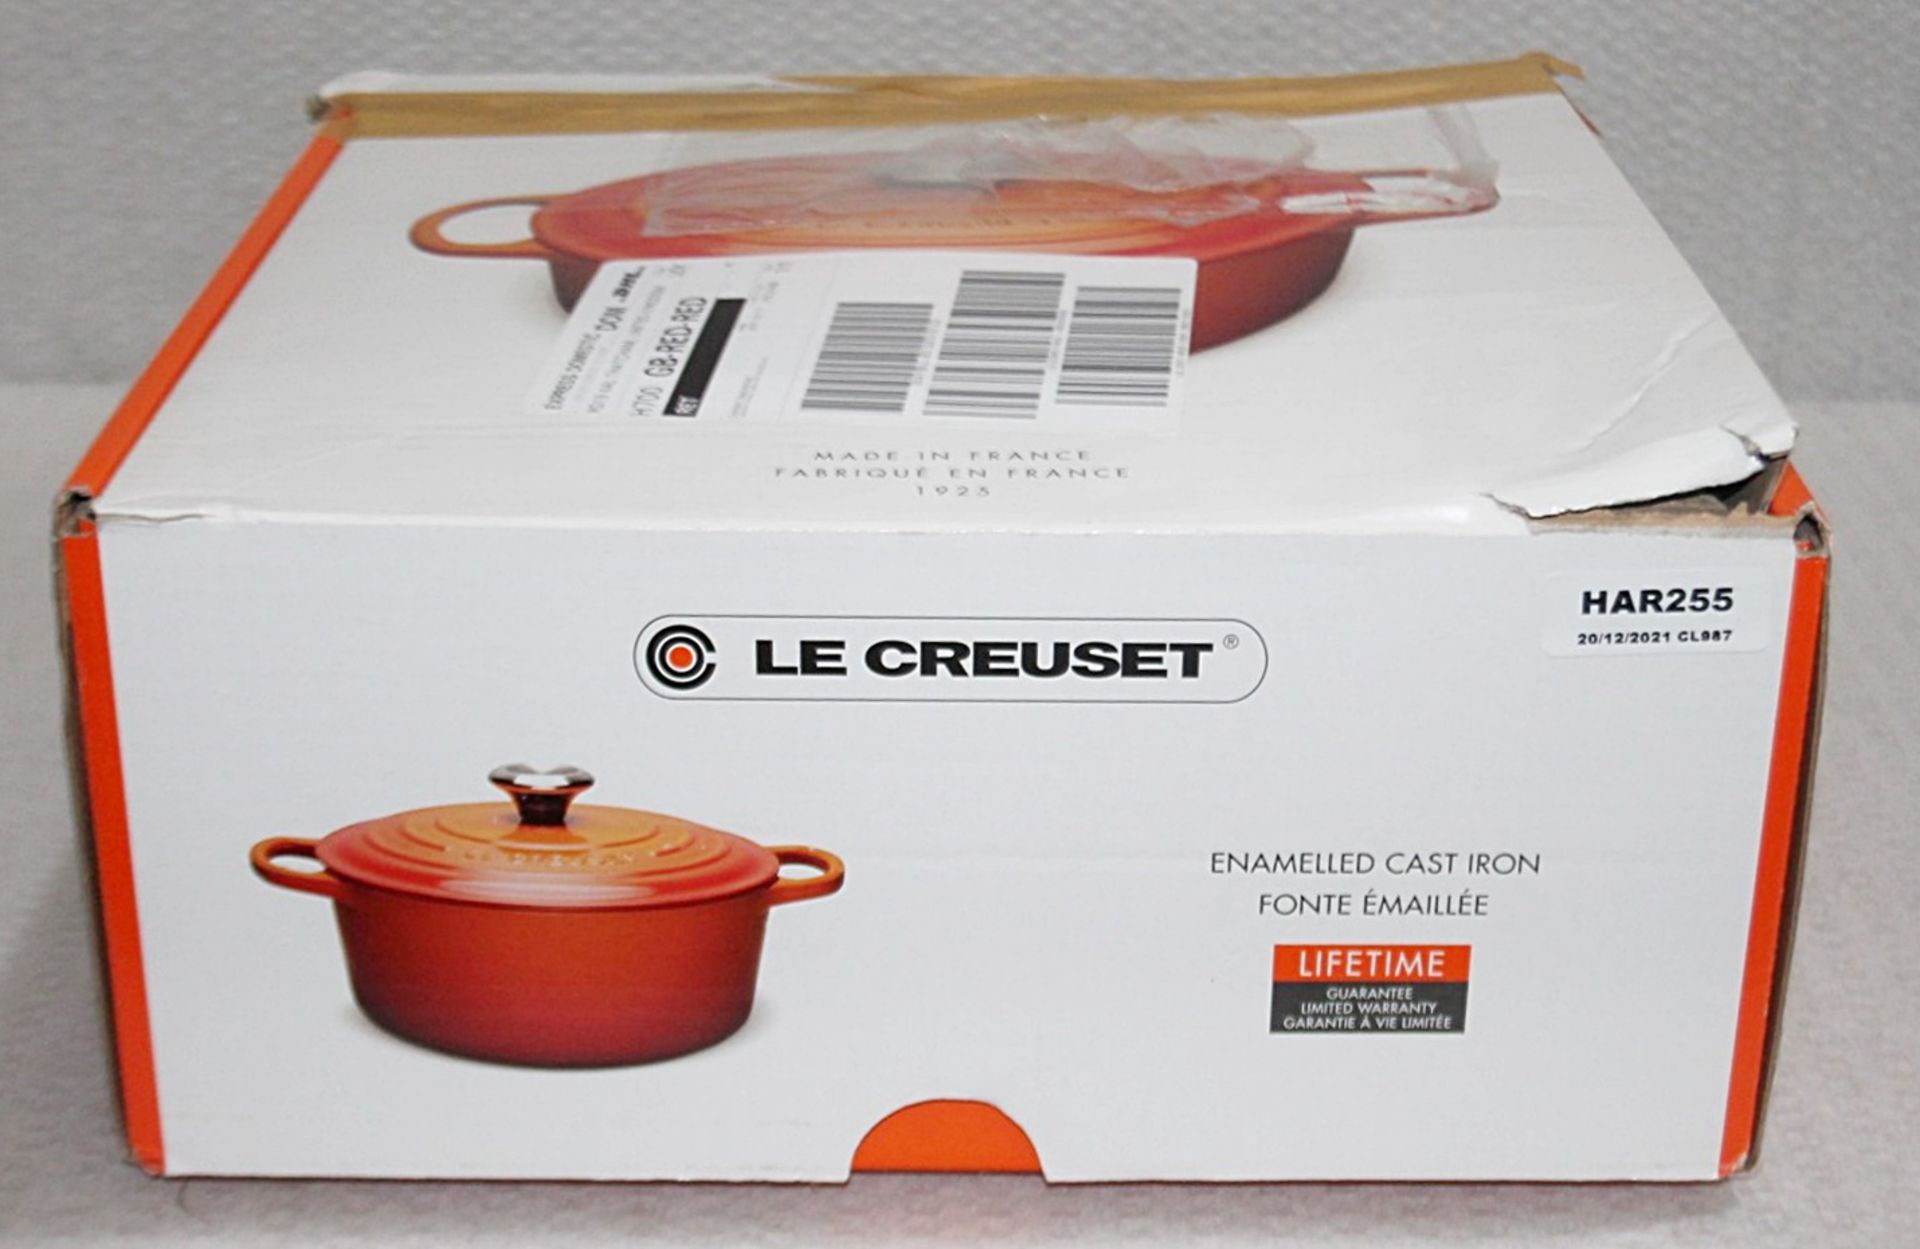 1 x LE CREUSET 'Signature' Enamelled Cast Iron 30cm Round Casserole Dish With Lid - RRP £260.00 - Image 6 of 8